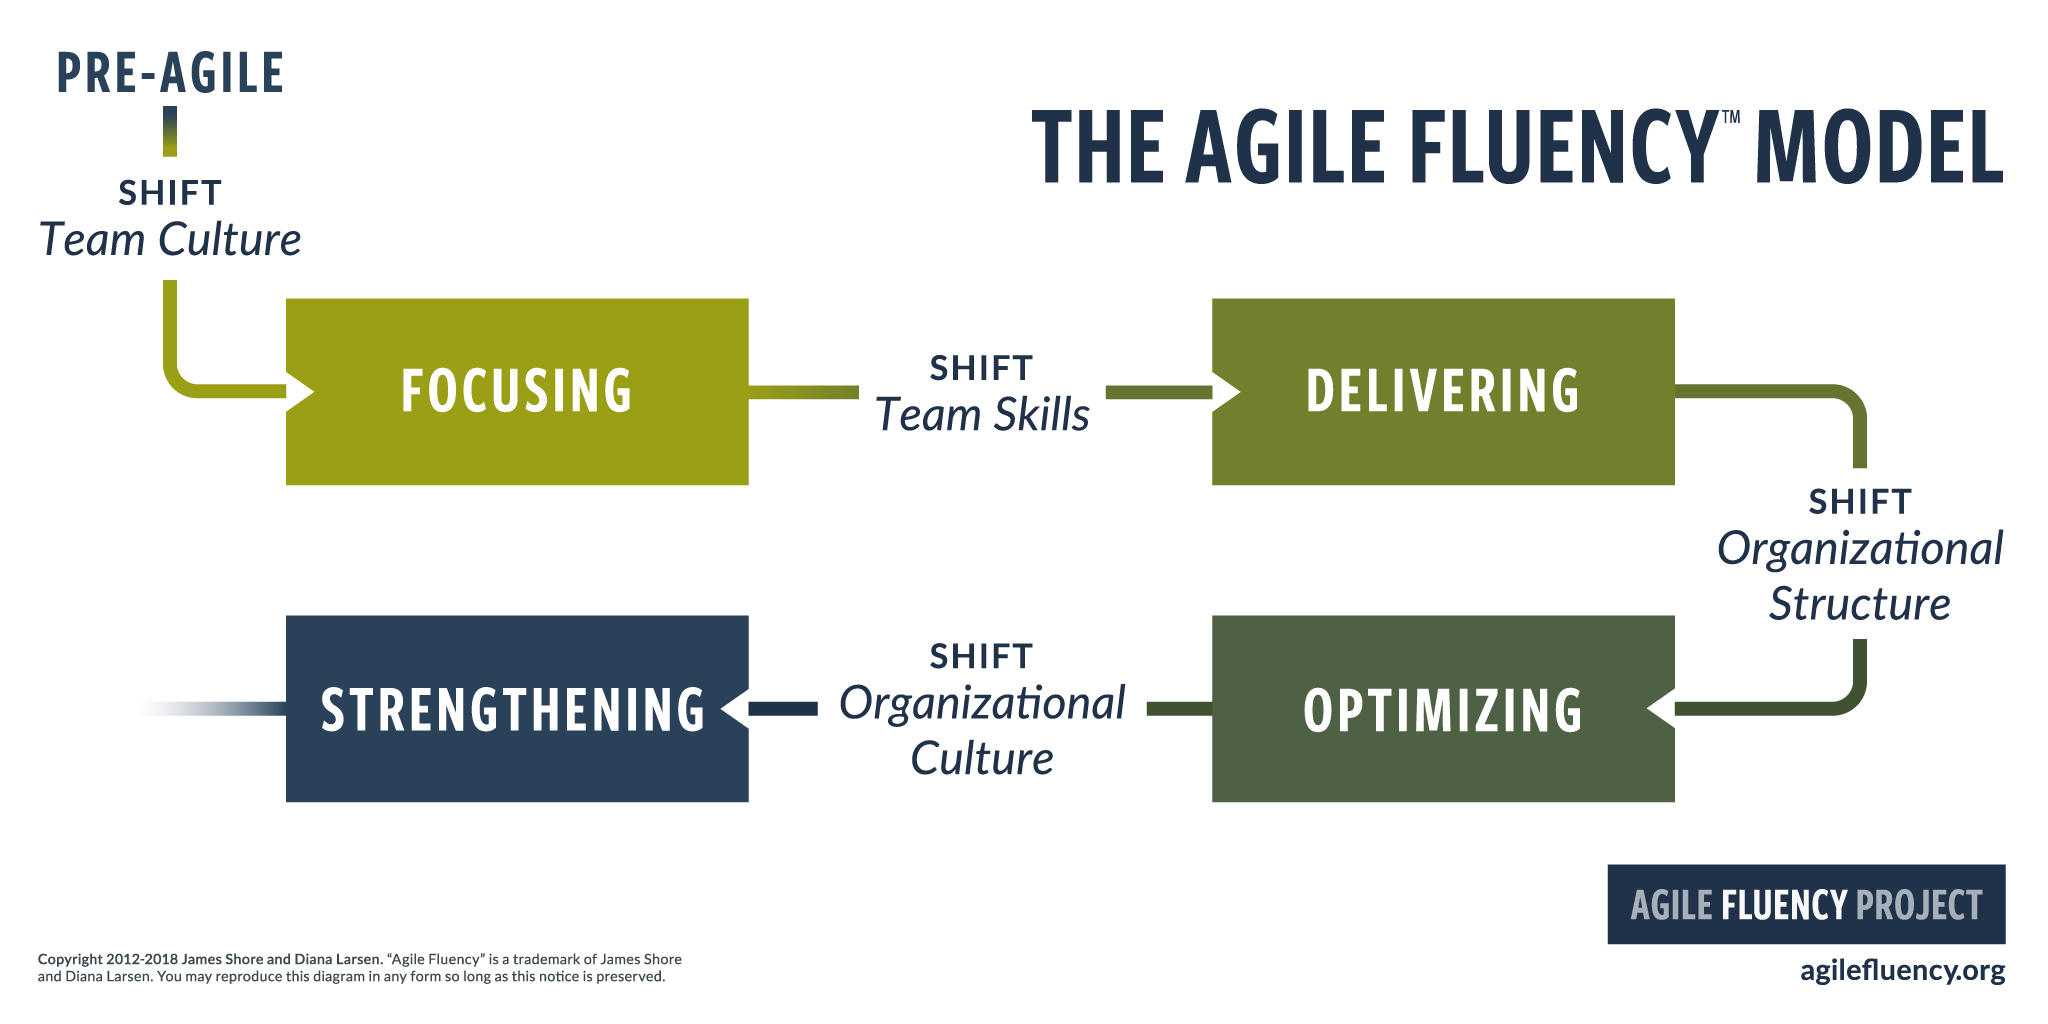 The Agile Fluency Model, showing a path starting with 'Pre-Agile', followed by a team culture shift, then the 'Focusing' zone. The path continues with a team skills shift that leads to the 'Delivering' zone. Next, an organizational structure shift leads to the 'Optimizing' zone. Finally, an organizational culture shift leads to the 'Strengthening' zone. After that, the path fades out as it continues on to zones yet undiscovered.